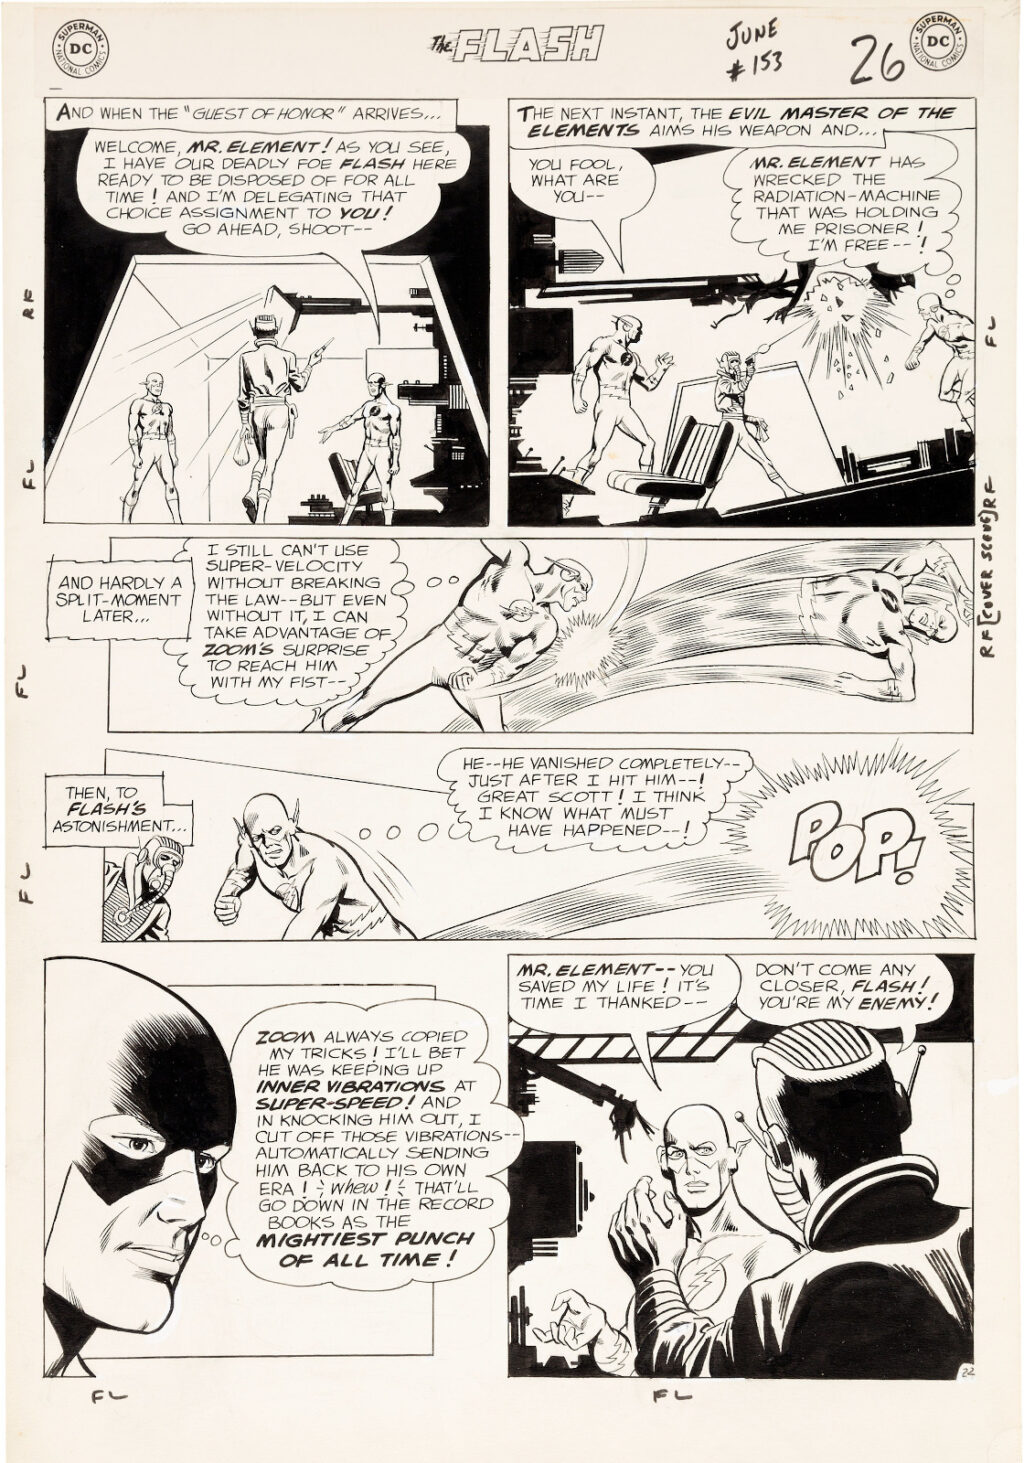 The Flash issue 153 page 22 by Carmine Infantino and Joe Giella